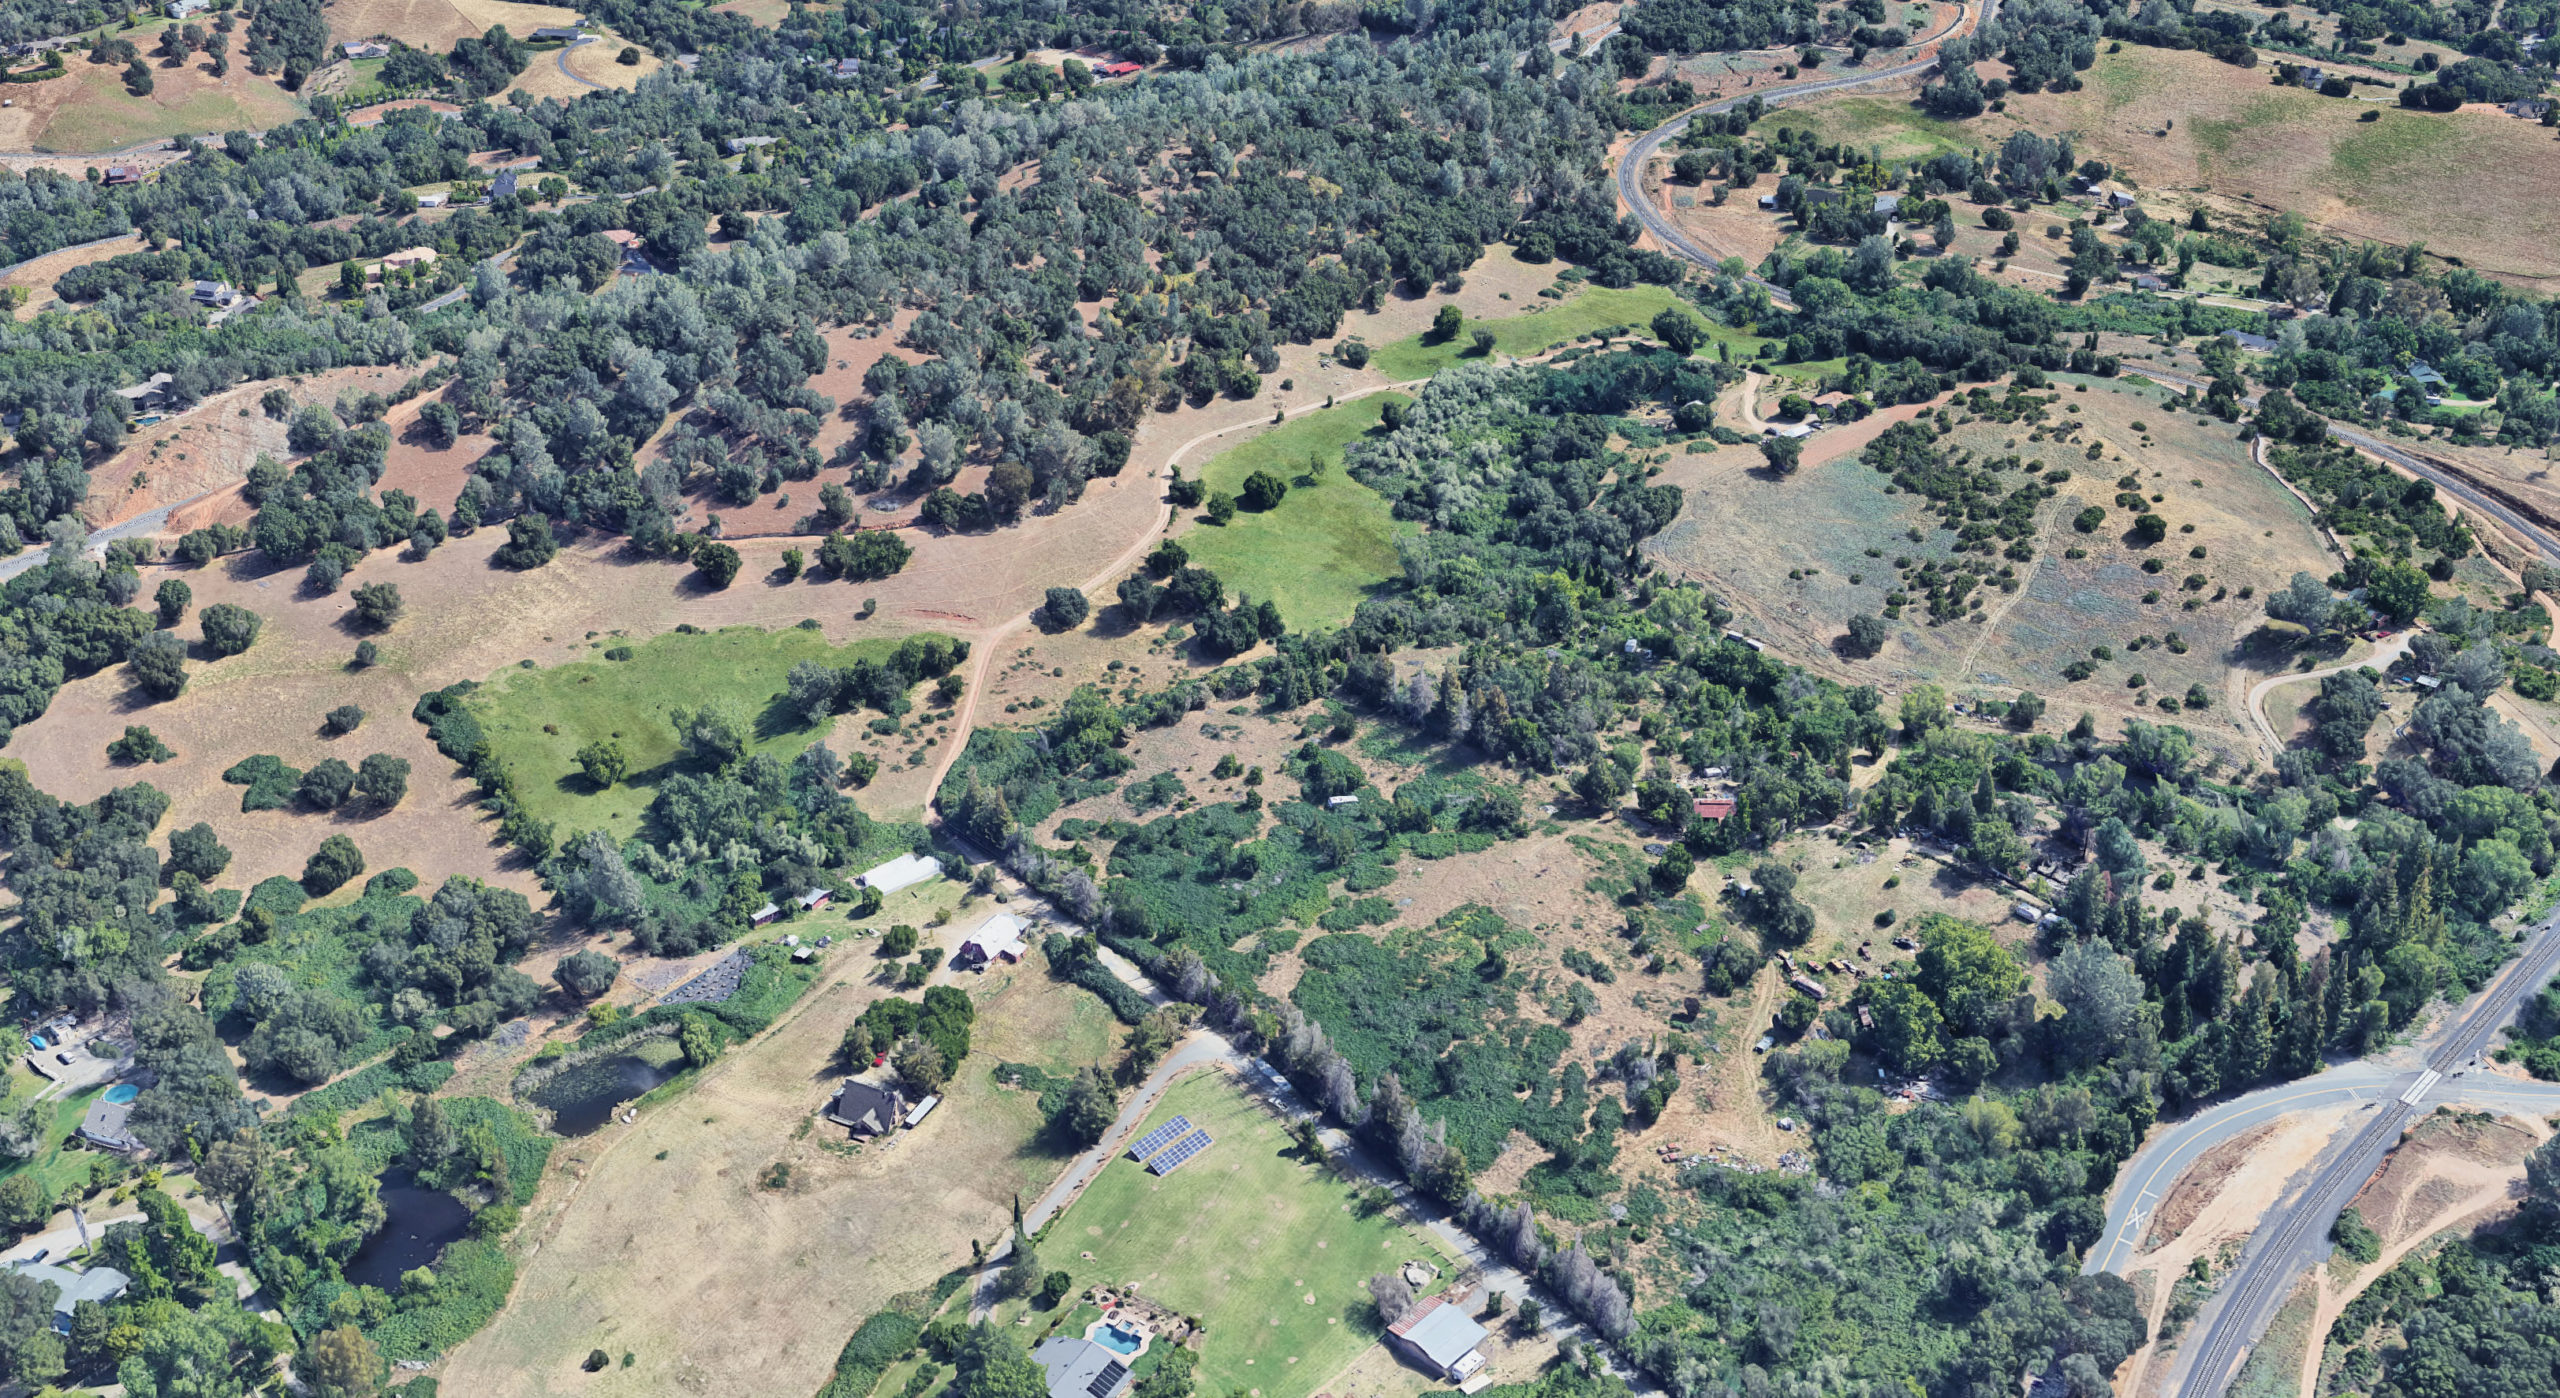 Project 8 Winery property and surrounding area, image via Google Satellite